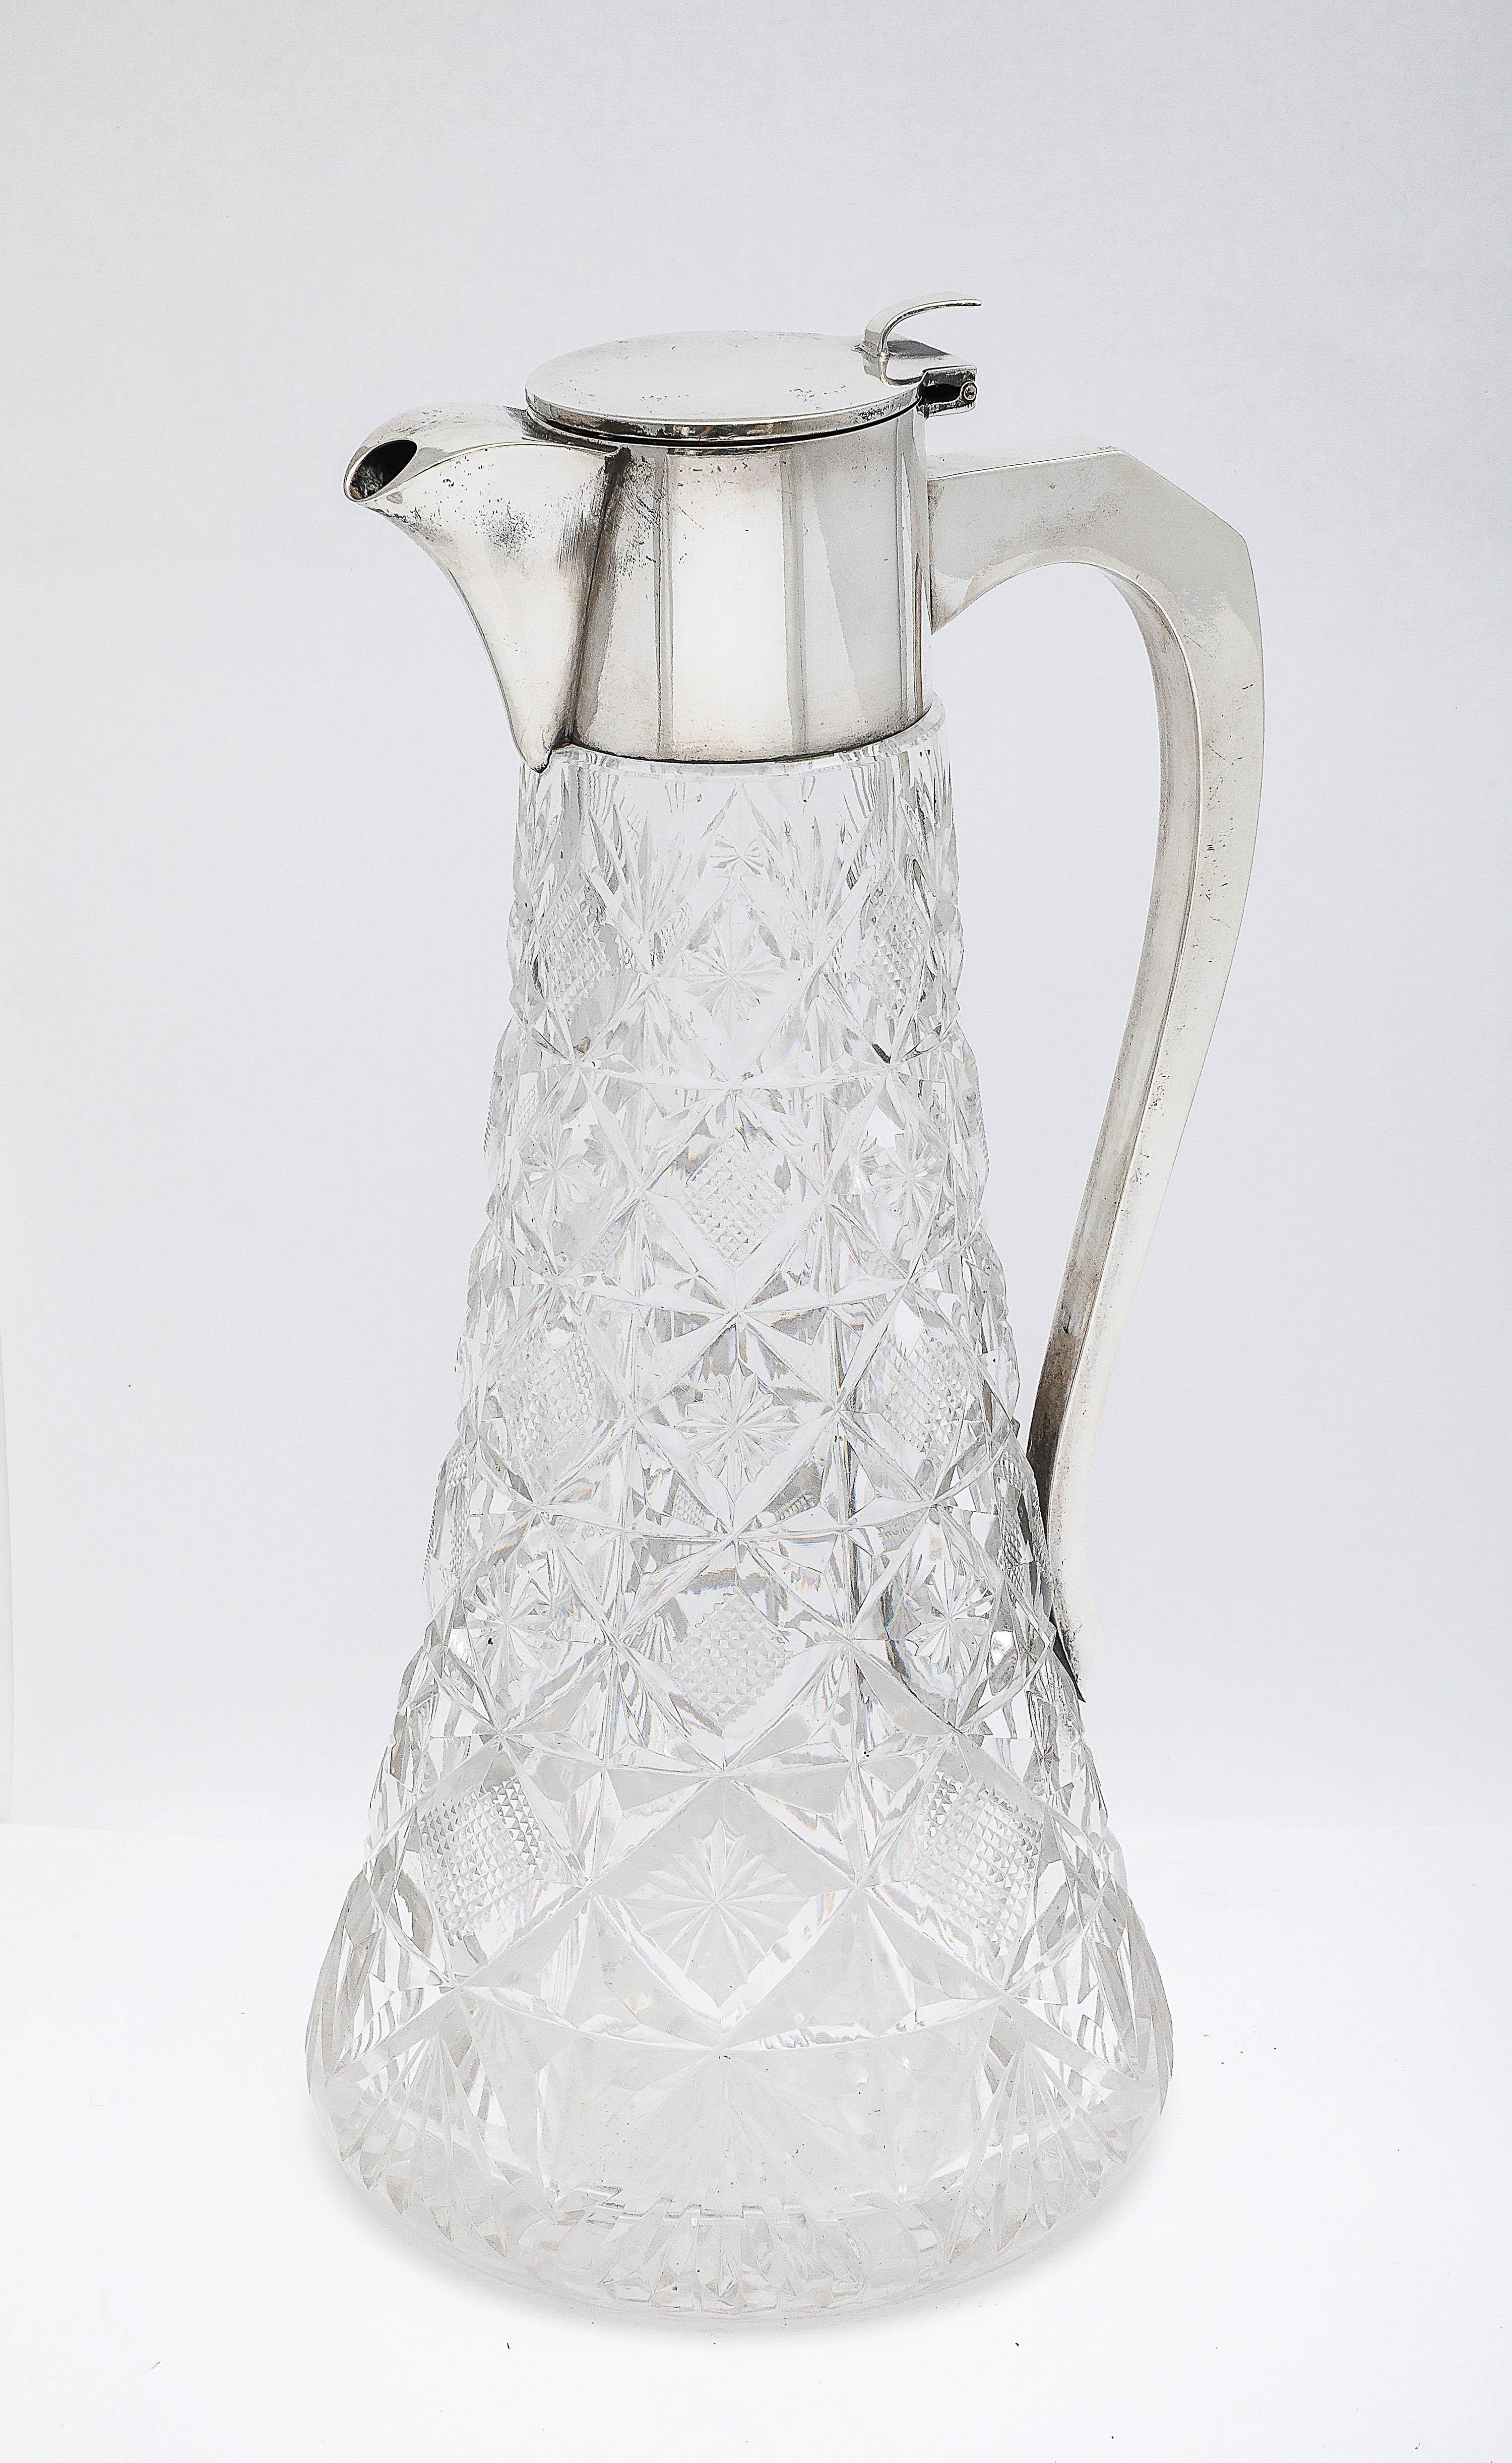 Large, Edwardian Period, sterling silver-mounted cut crystal claret jug, Sheffield, England, Walker and Hall - makers. Measures 11 inches high (at highest point) x 5 inches diameter (at widest point) x  5 inches across from outer edge of spout to